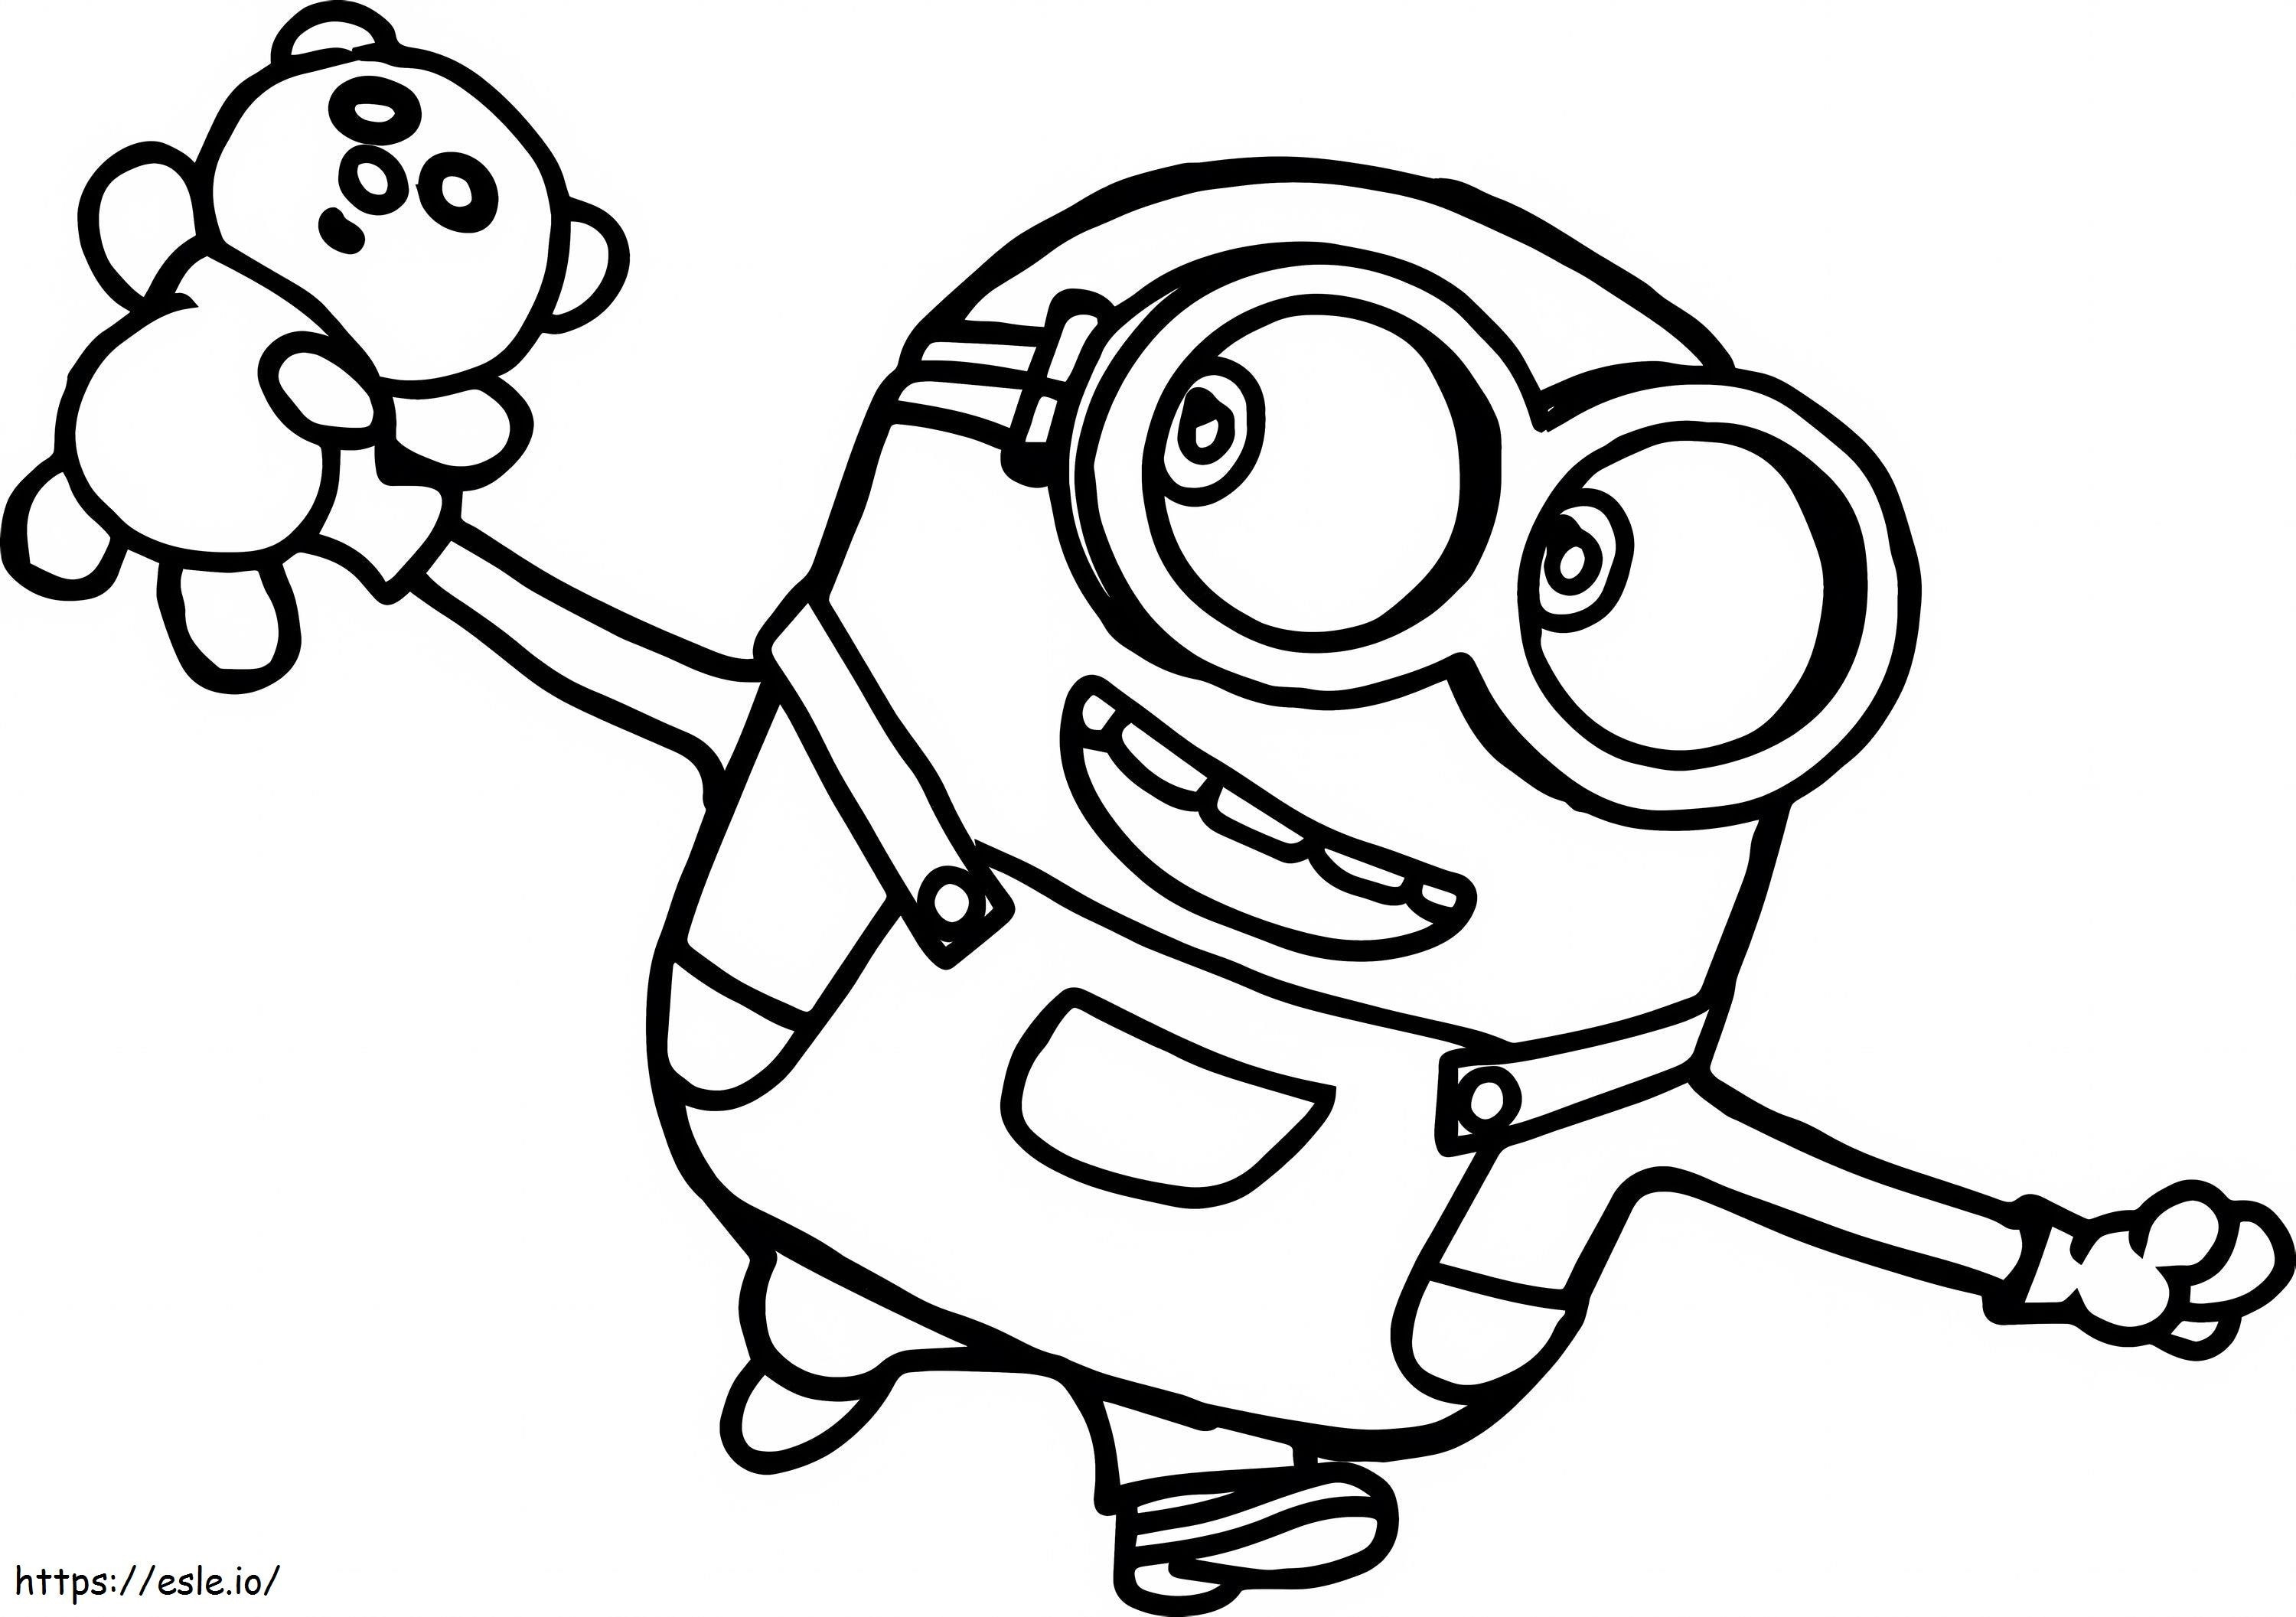 1531712713 Minion With Teddy A4 E1600391765572 coloring page